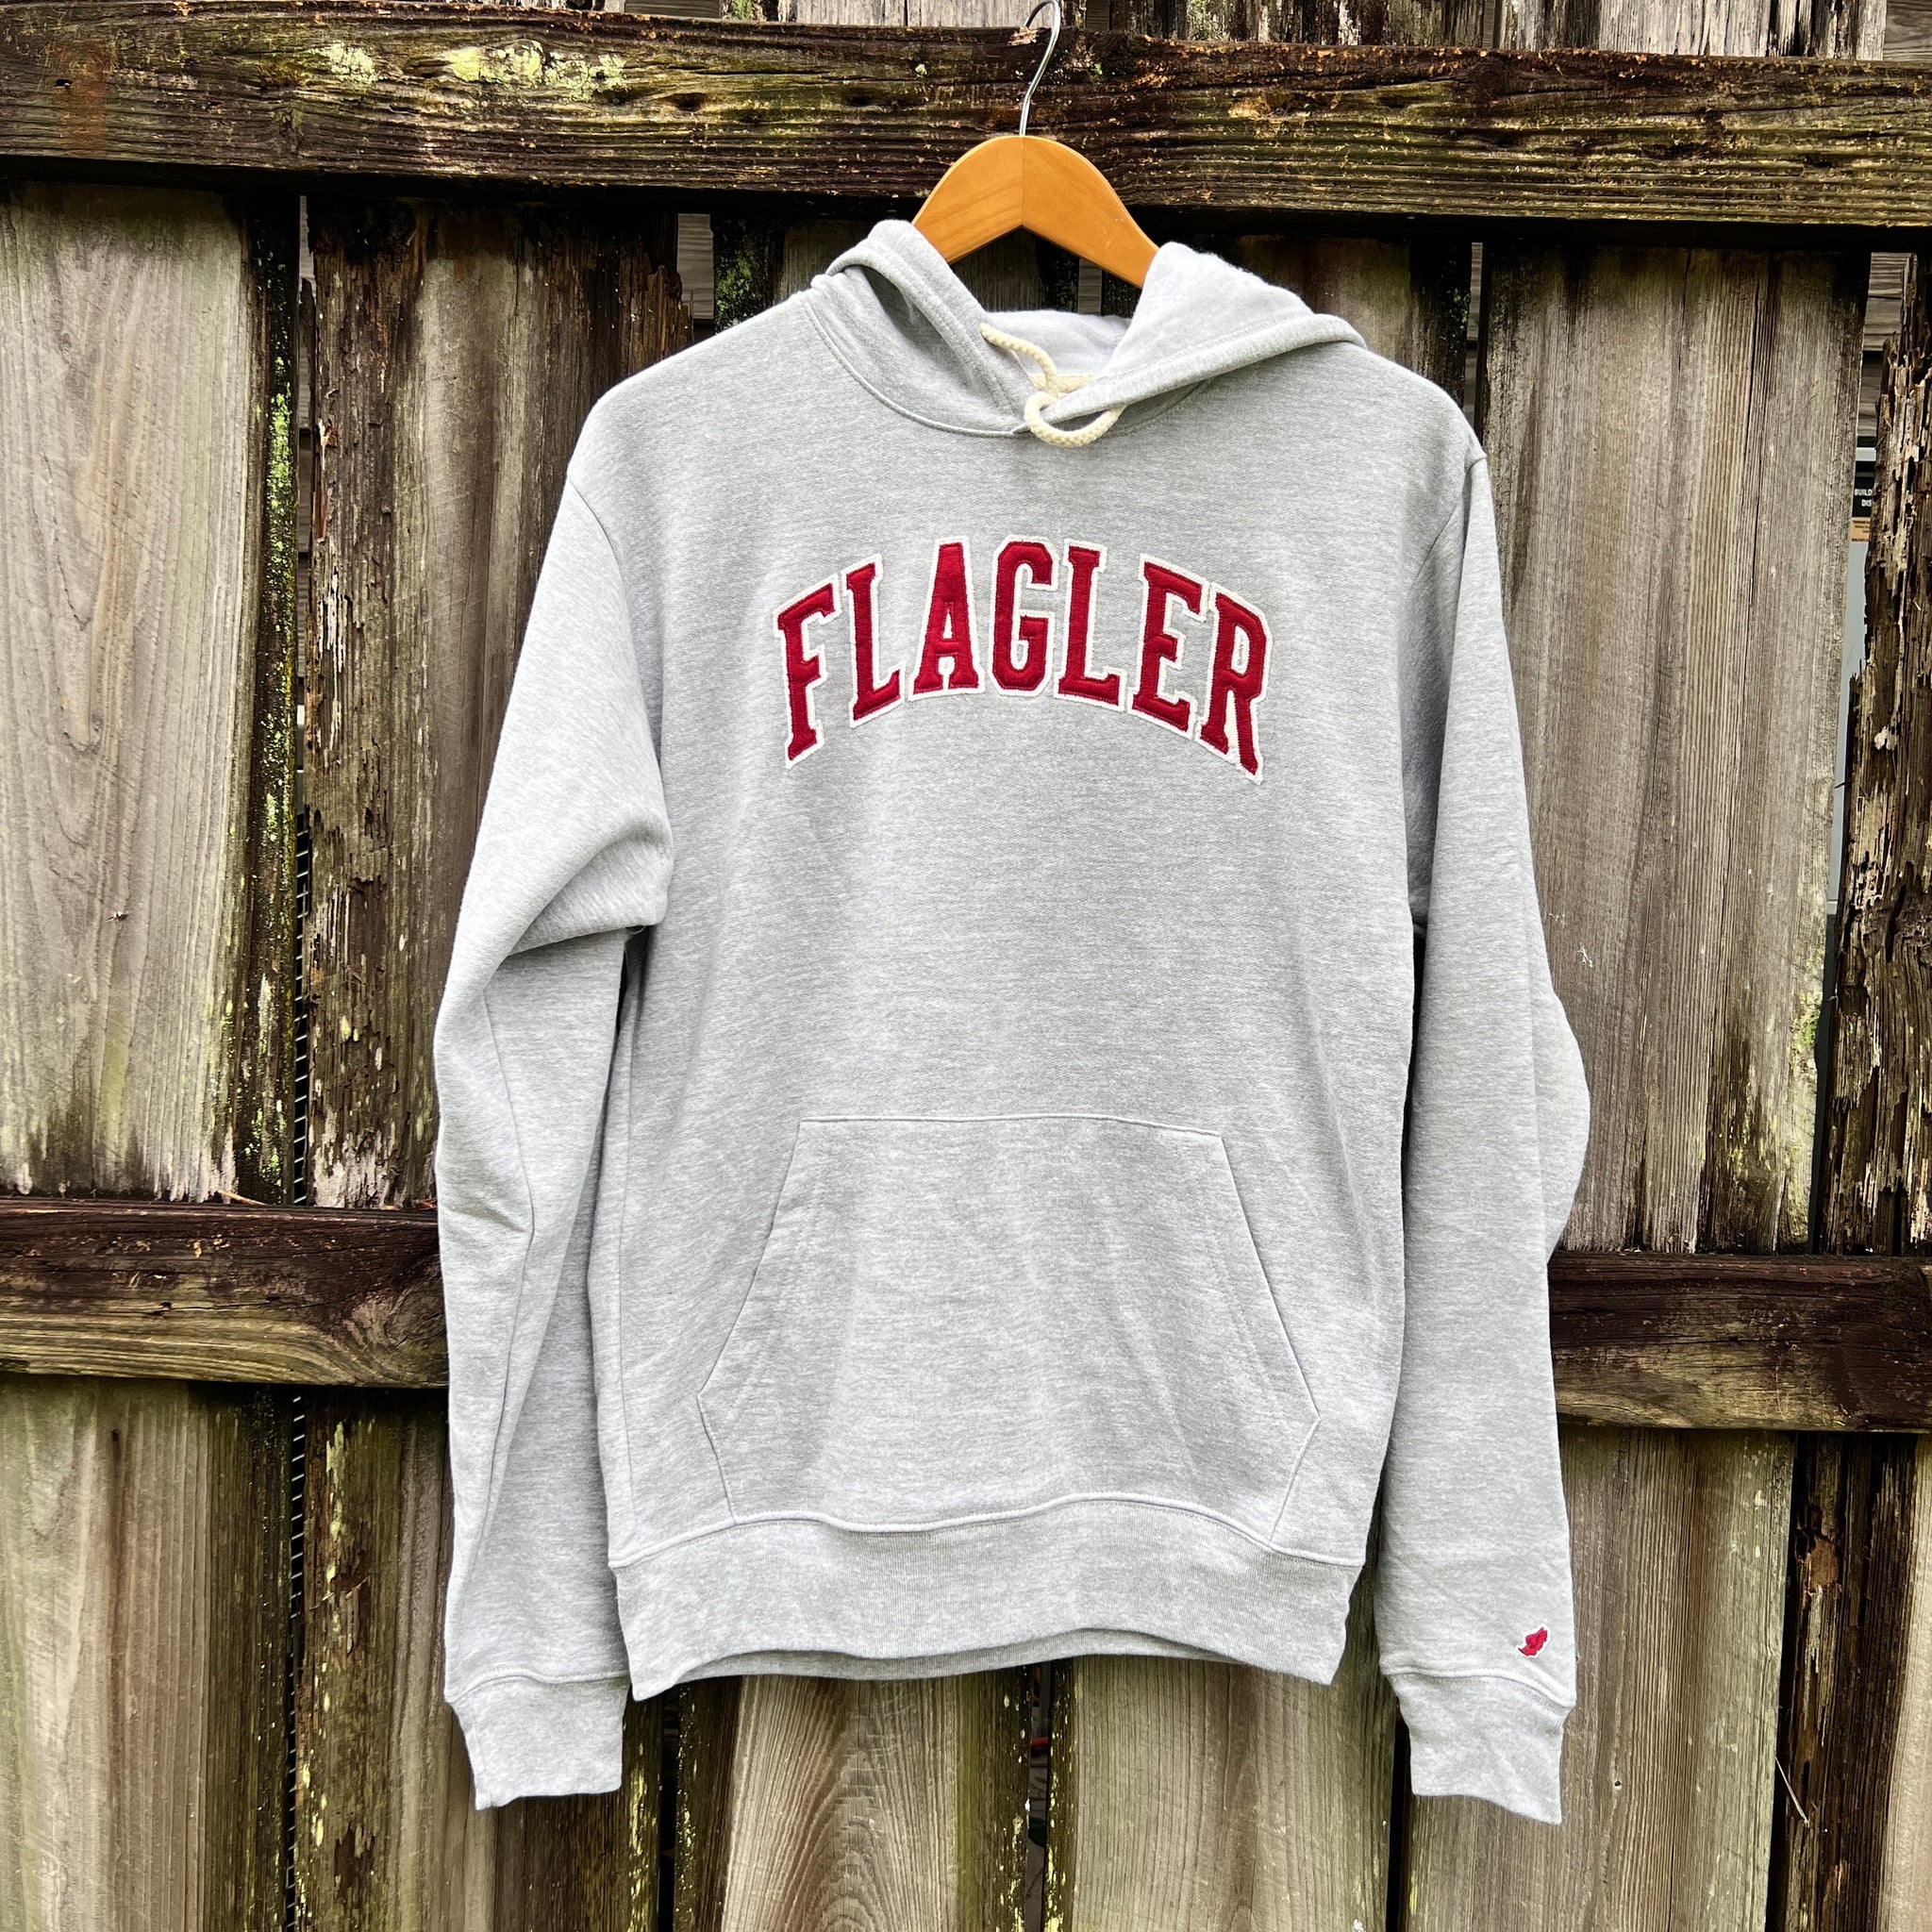 Oxford Grey hooded sweatshirt with arched crimson embroidering saying Flagler